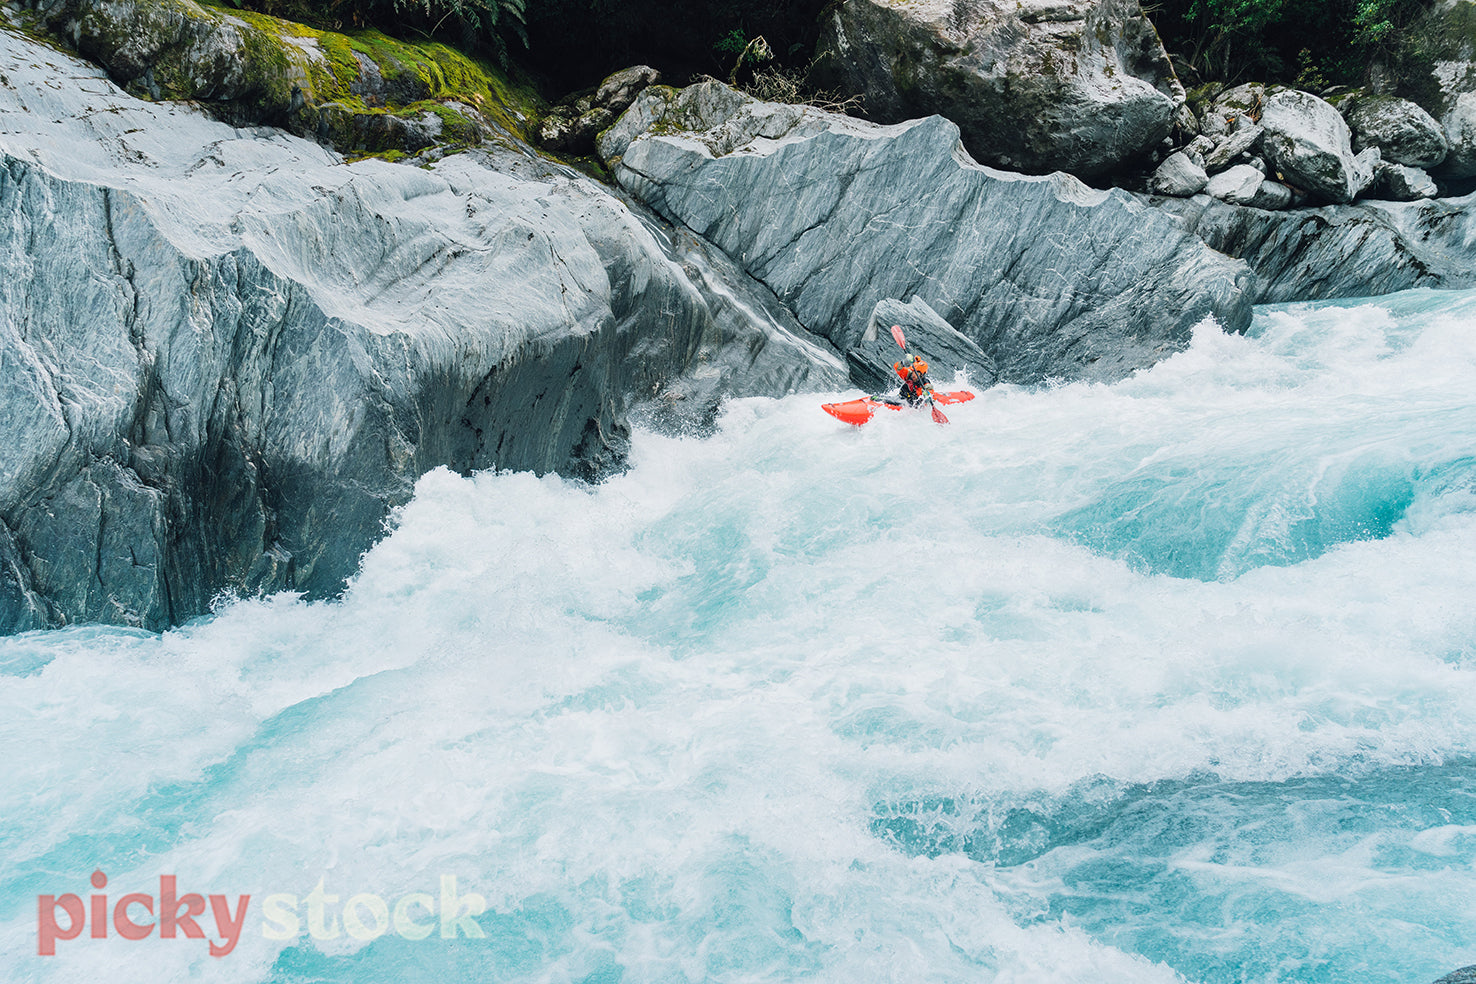 Whitewater kayaker in big rapid on turquoise river